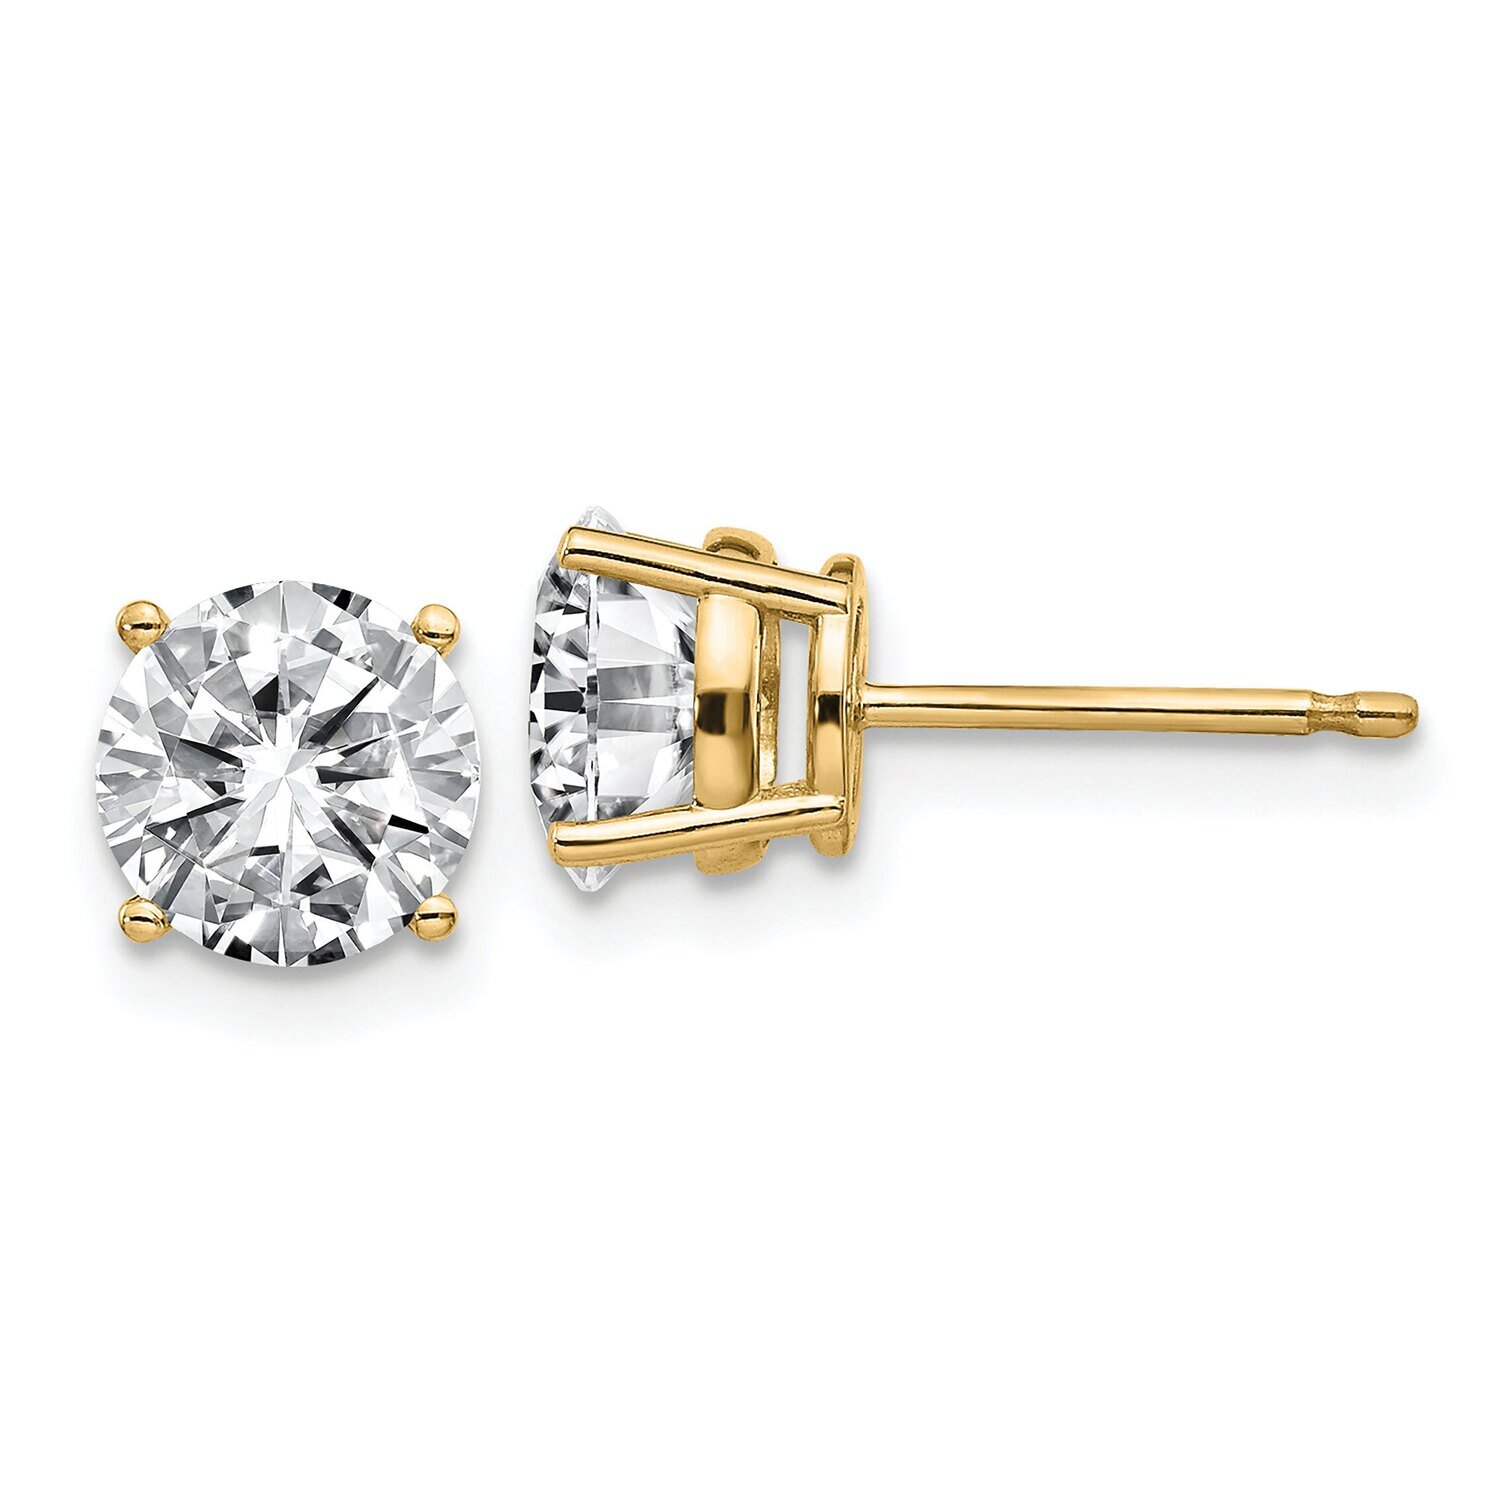 Round 4-Prong Medium Weight .62ct. Post Earring Mounting 14k Yellow Gold YG326-10MT